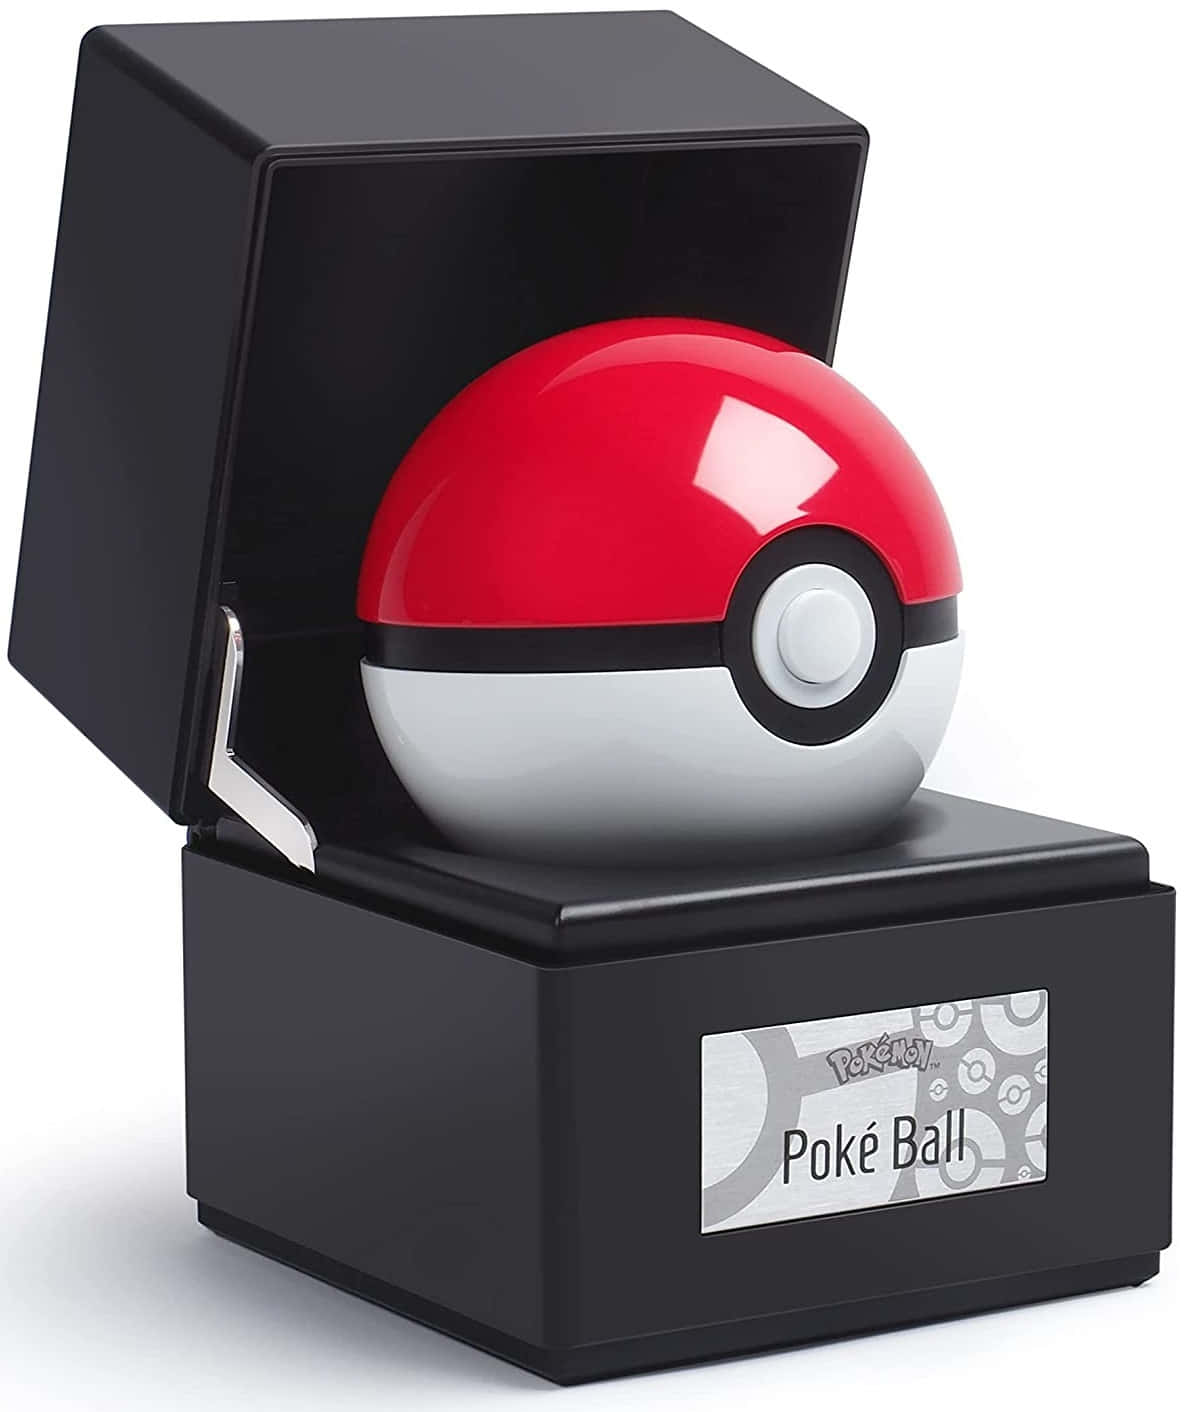 pokeball in a box with a red and black ball